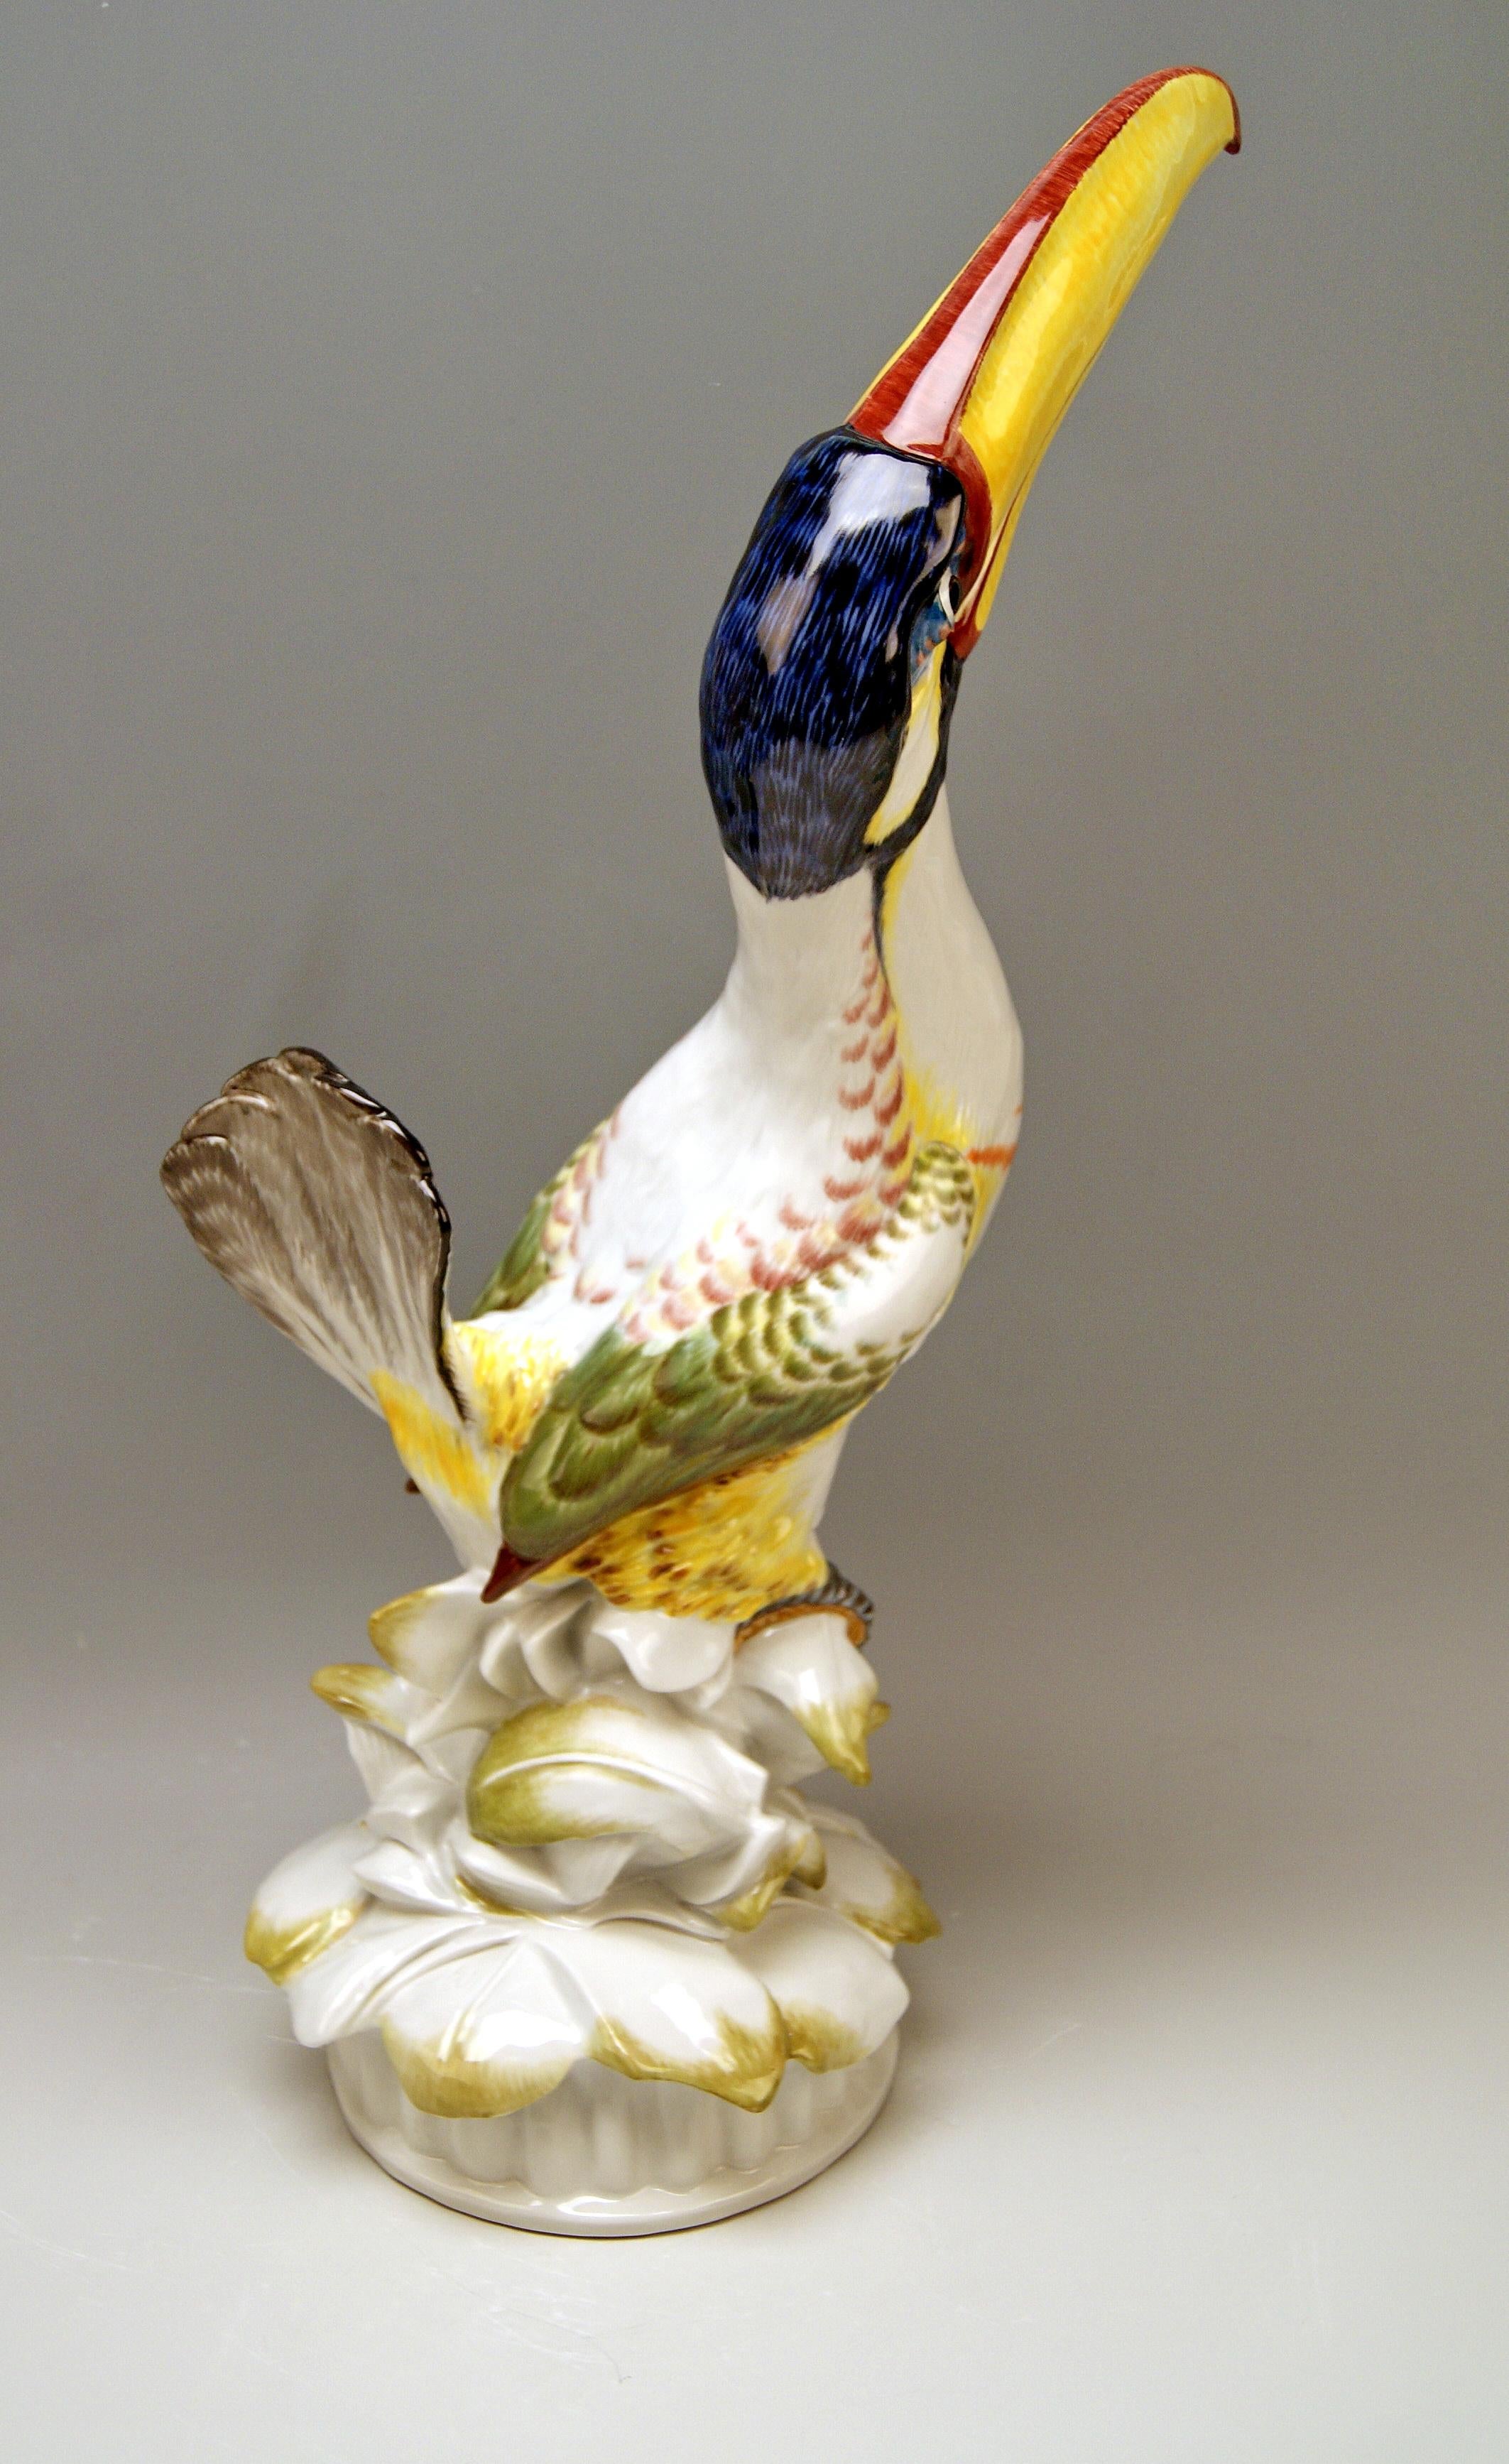 Painted Meissen Tall Guianan Toucanet Art Deco Style 58 Cm Model 76025 Paul Walther 1978